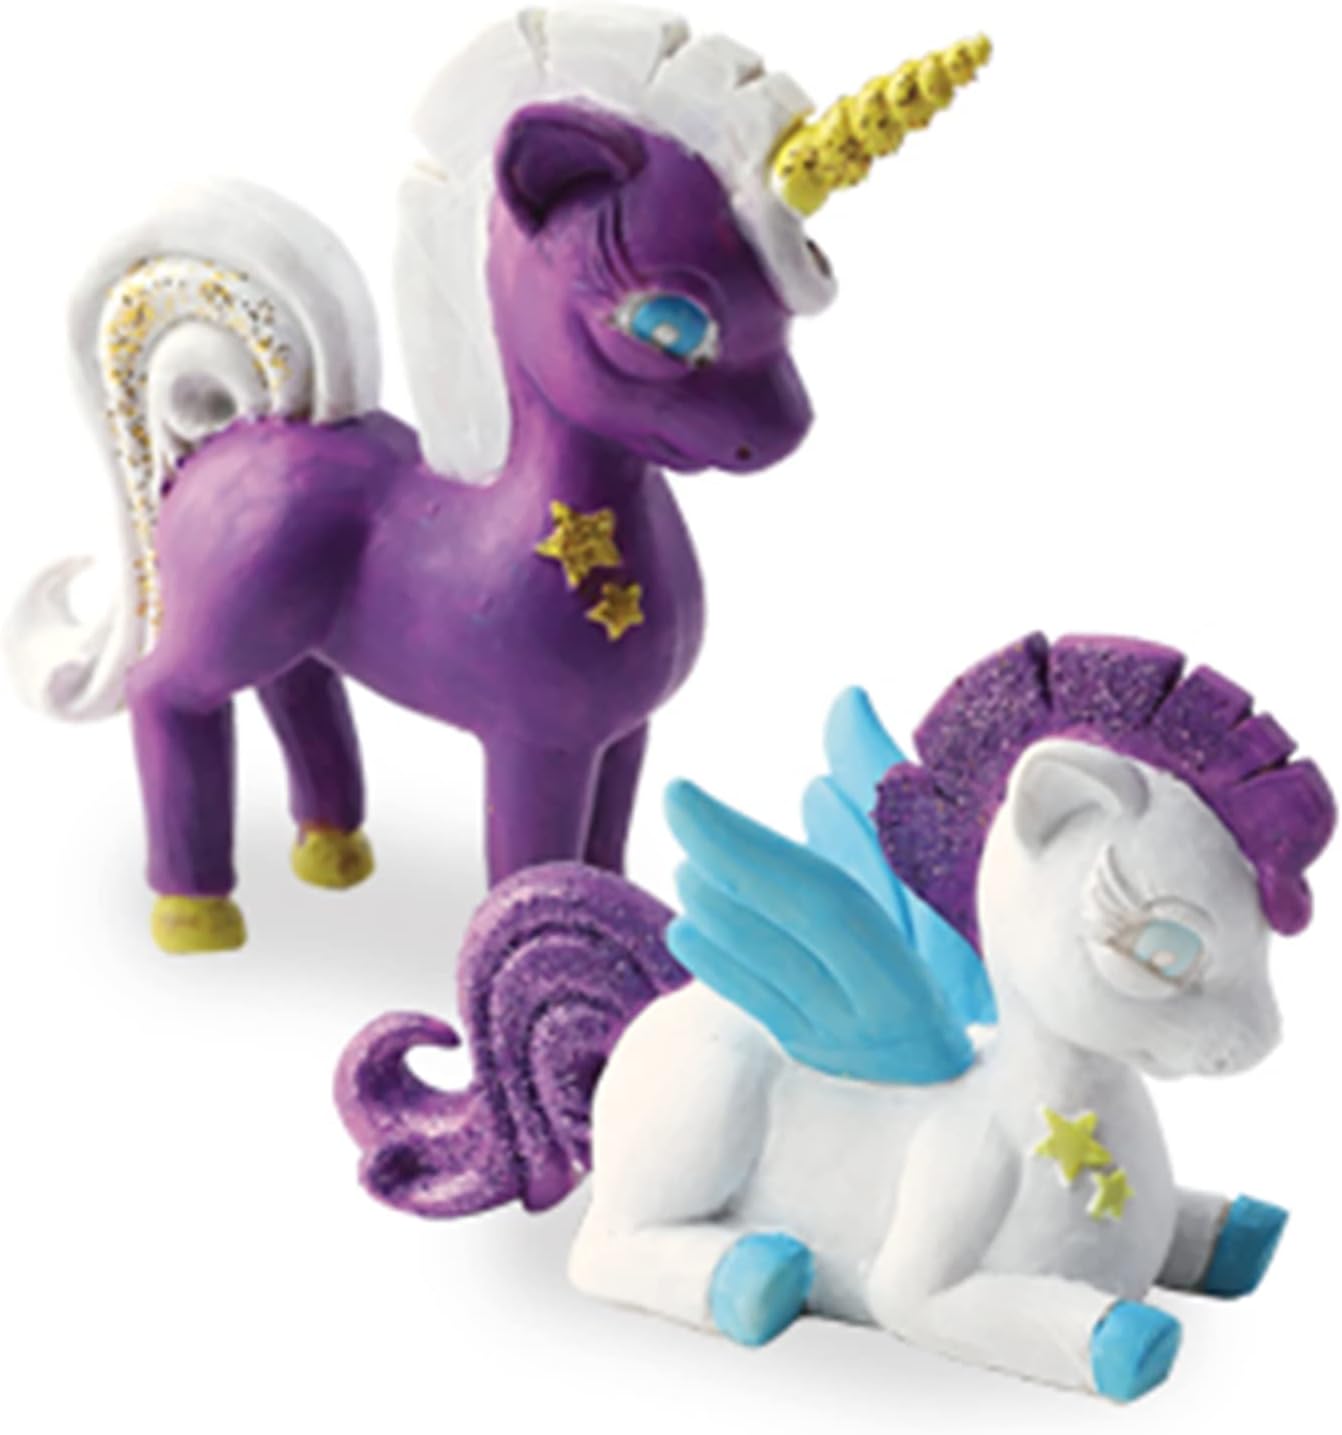 Amav Toys 3D Unicron & Pegasus Painting Kit - All Inclusive & Ready To Paint - Enhance Creativity, Imagination & Improve Motor Skills - Best DIY Activity - Ideal Present For Unicorn Lovers Aged 3+